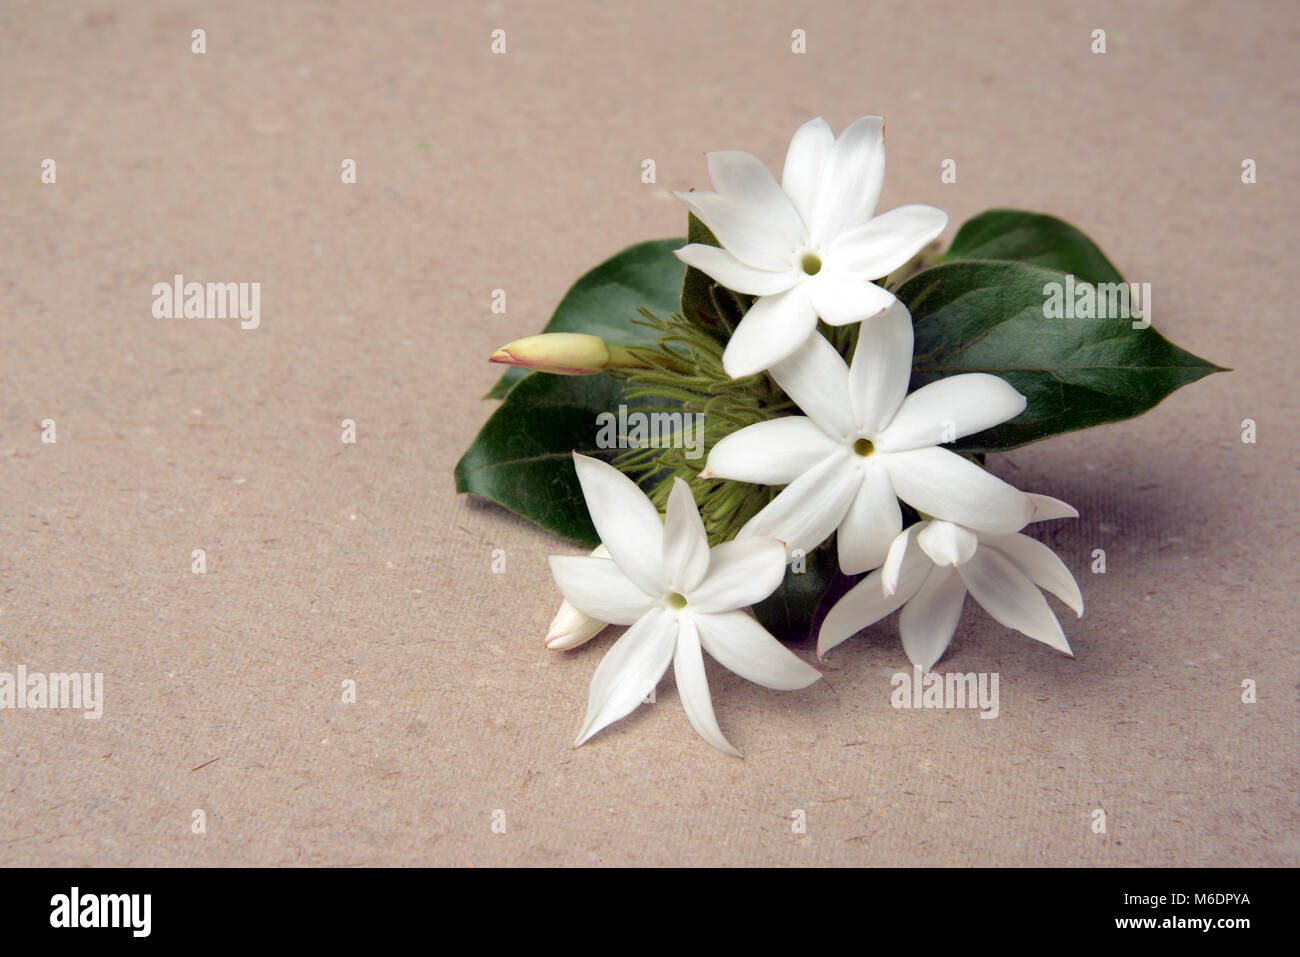 Bunch of white jasmine commonly known as star jasmine. Stock Photo